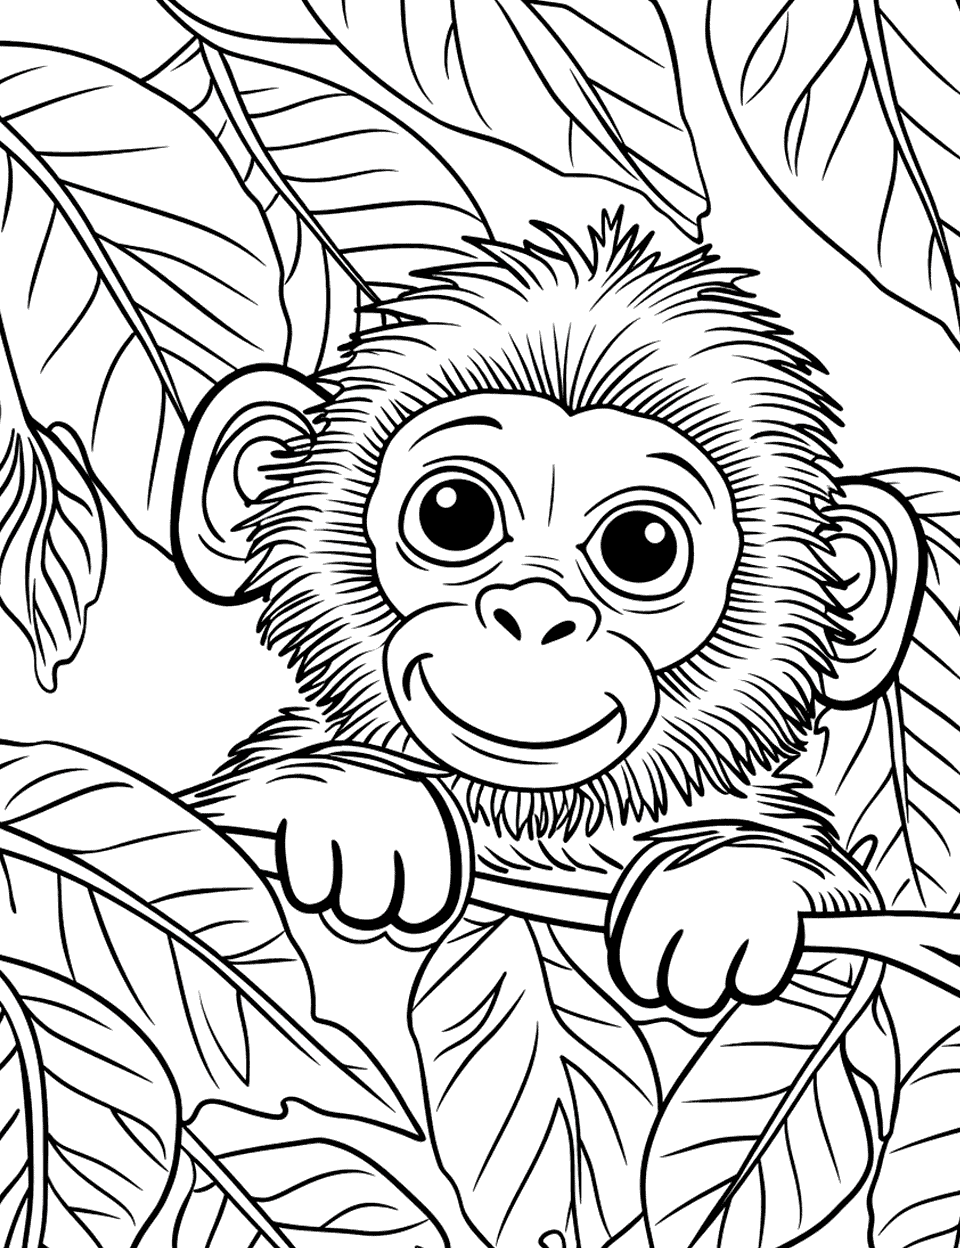 Monkey Hiding Behind Leaves Coloring Page - A shy monkey peeking out from behind dense leaves.